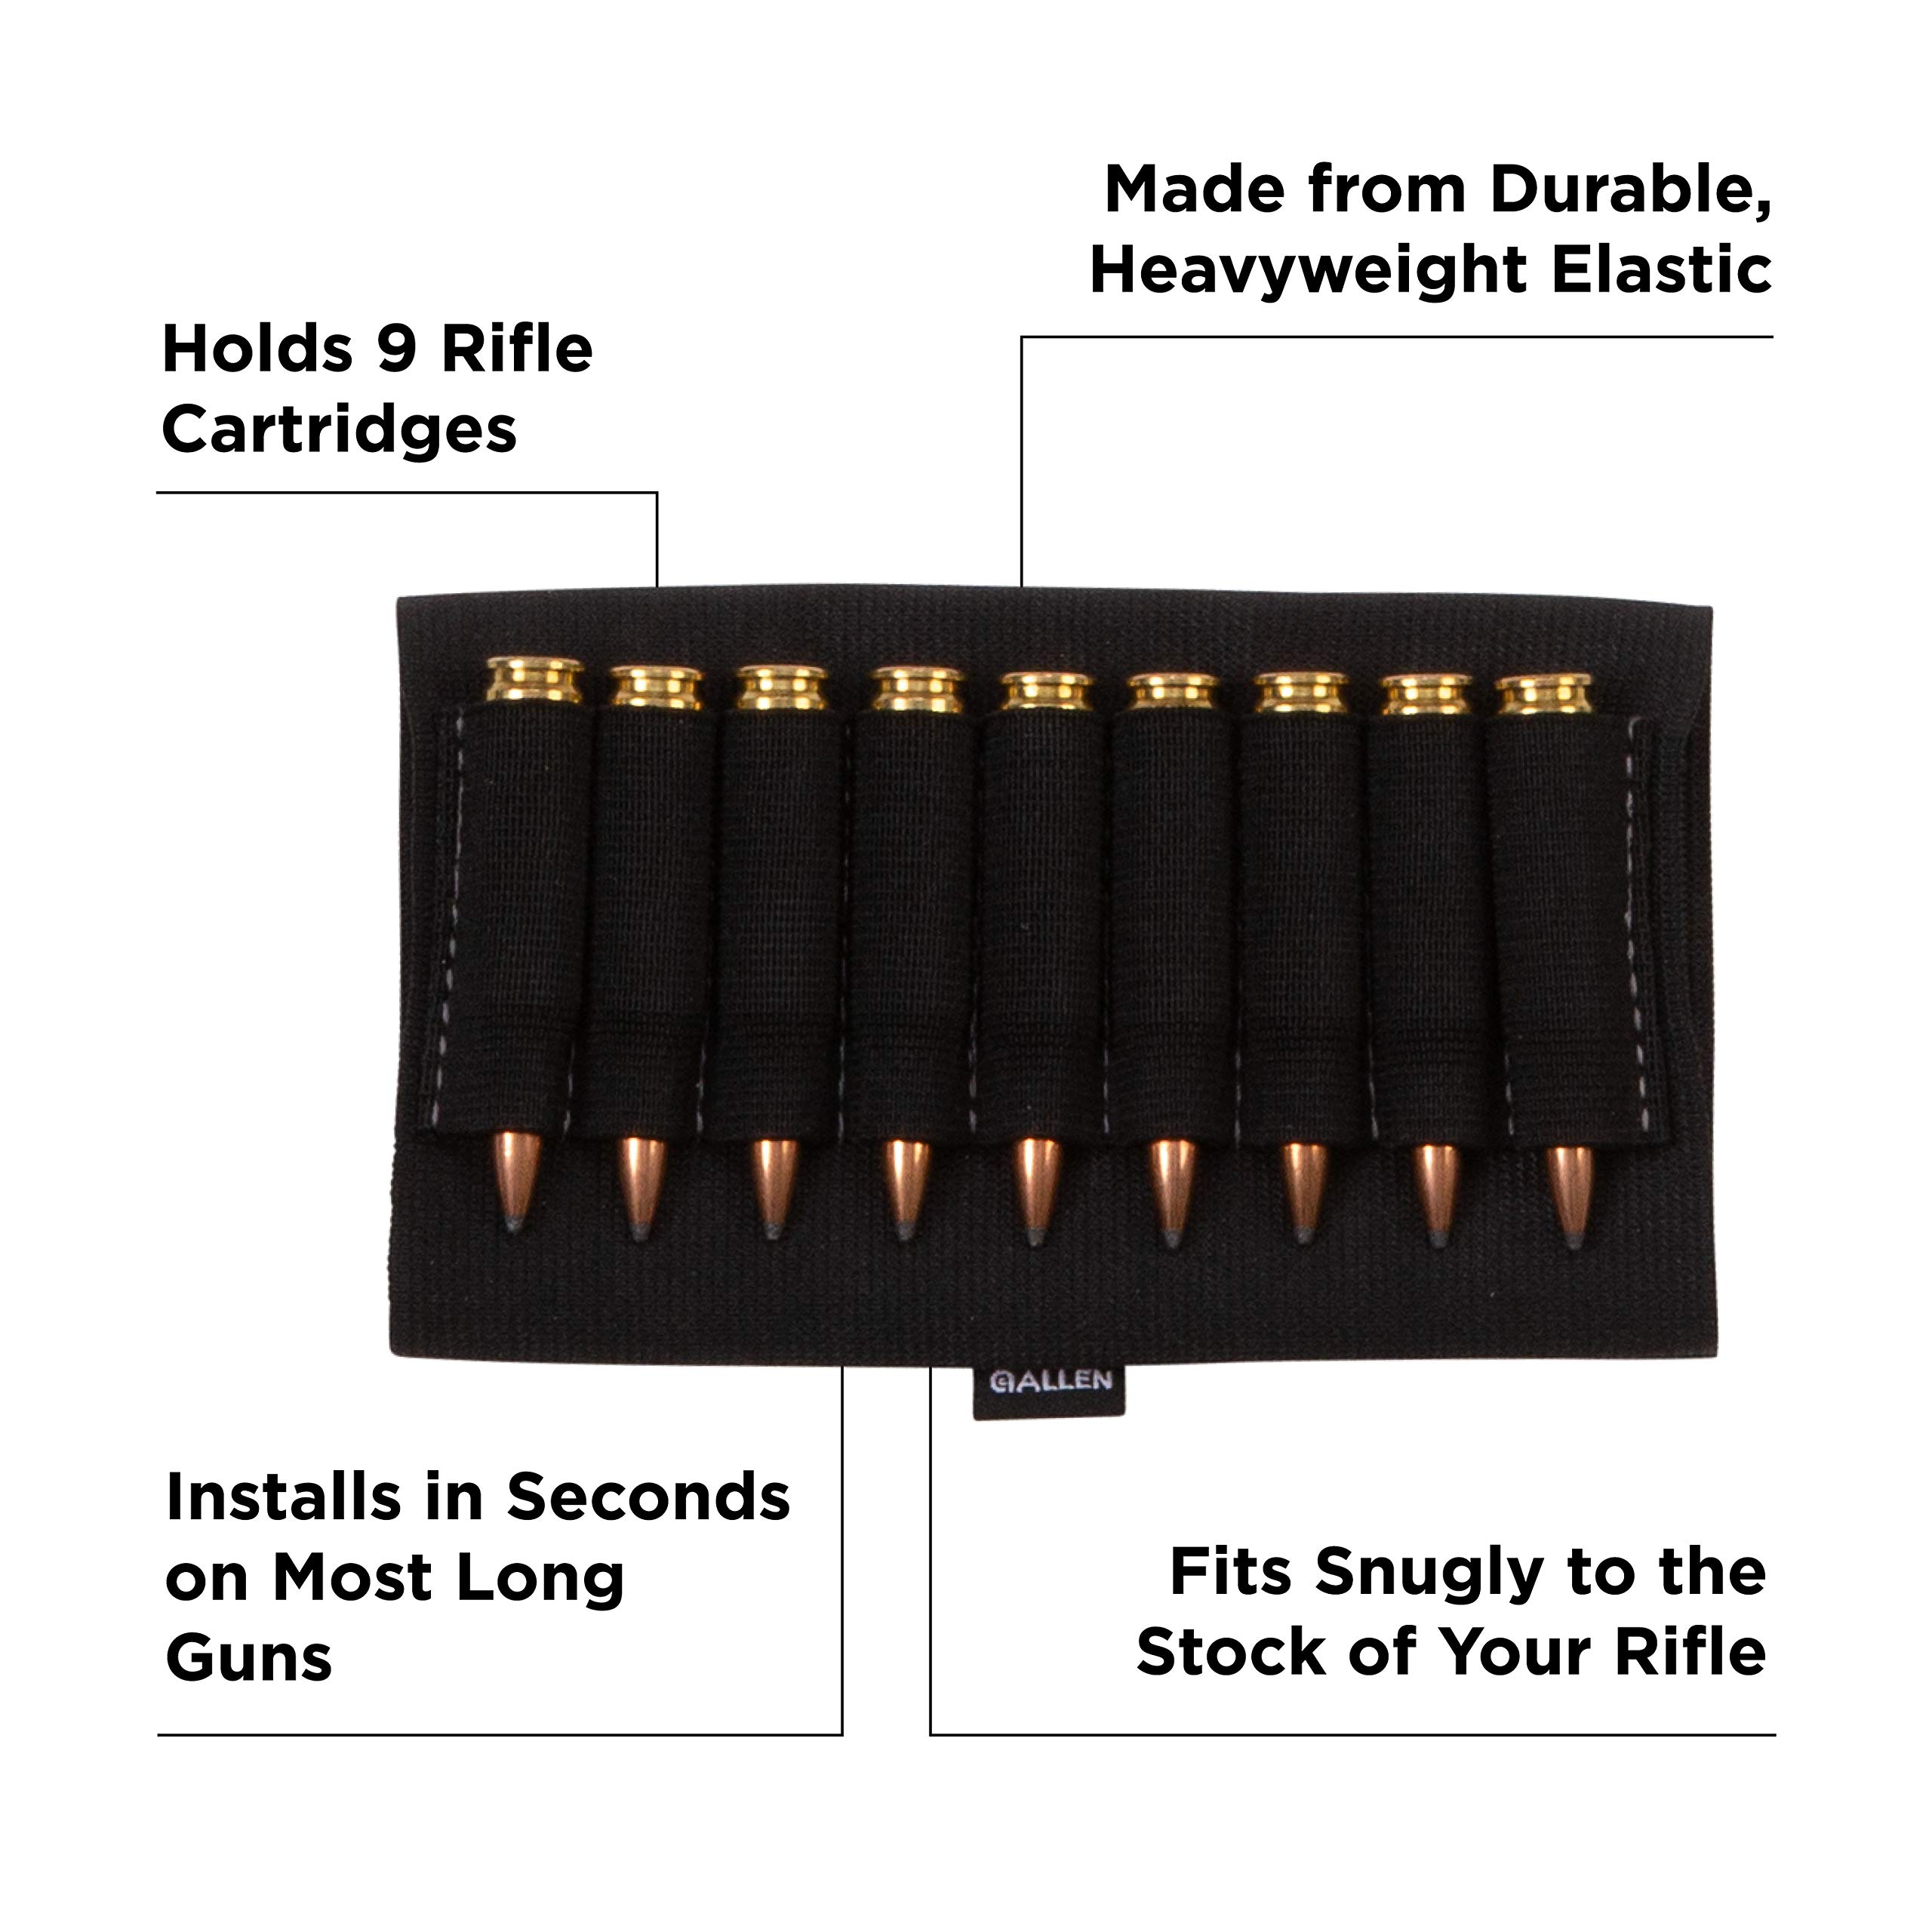 Allen Company Rifle Buttstock Shell/Cartridge Holder, Durable Elastic Loops Hold .270, 30.06, 6.5 Creedmoor, 7 mm (Fits Most Hunting Rifles), Black, 206